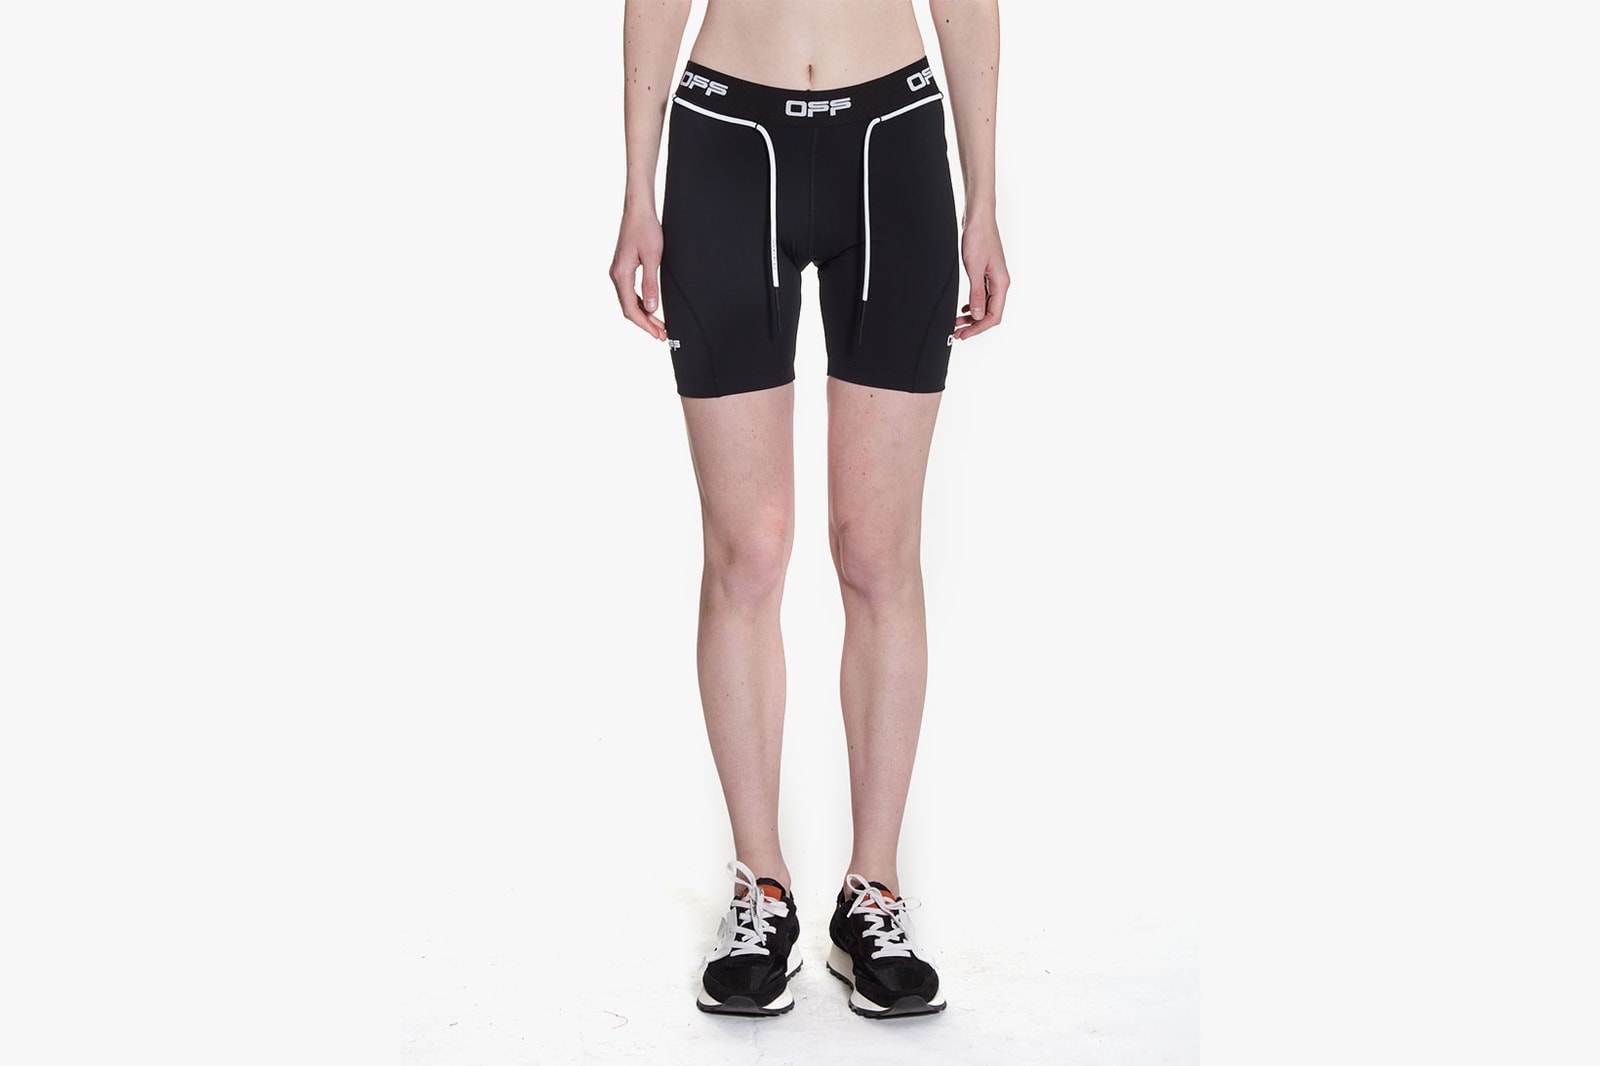 off-white activewear virgil abloh sports bras cycling shorts leggings release info